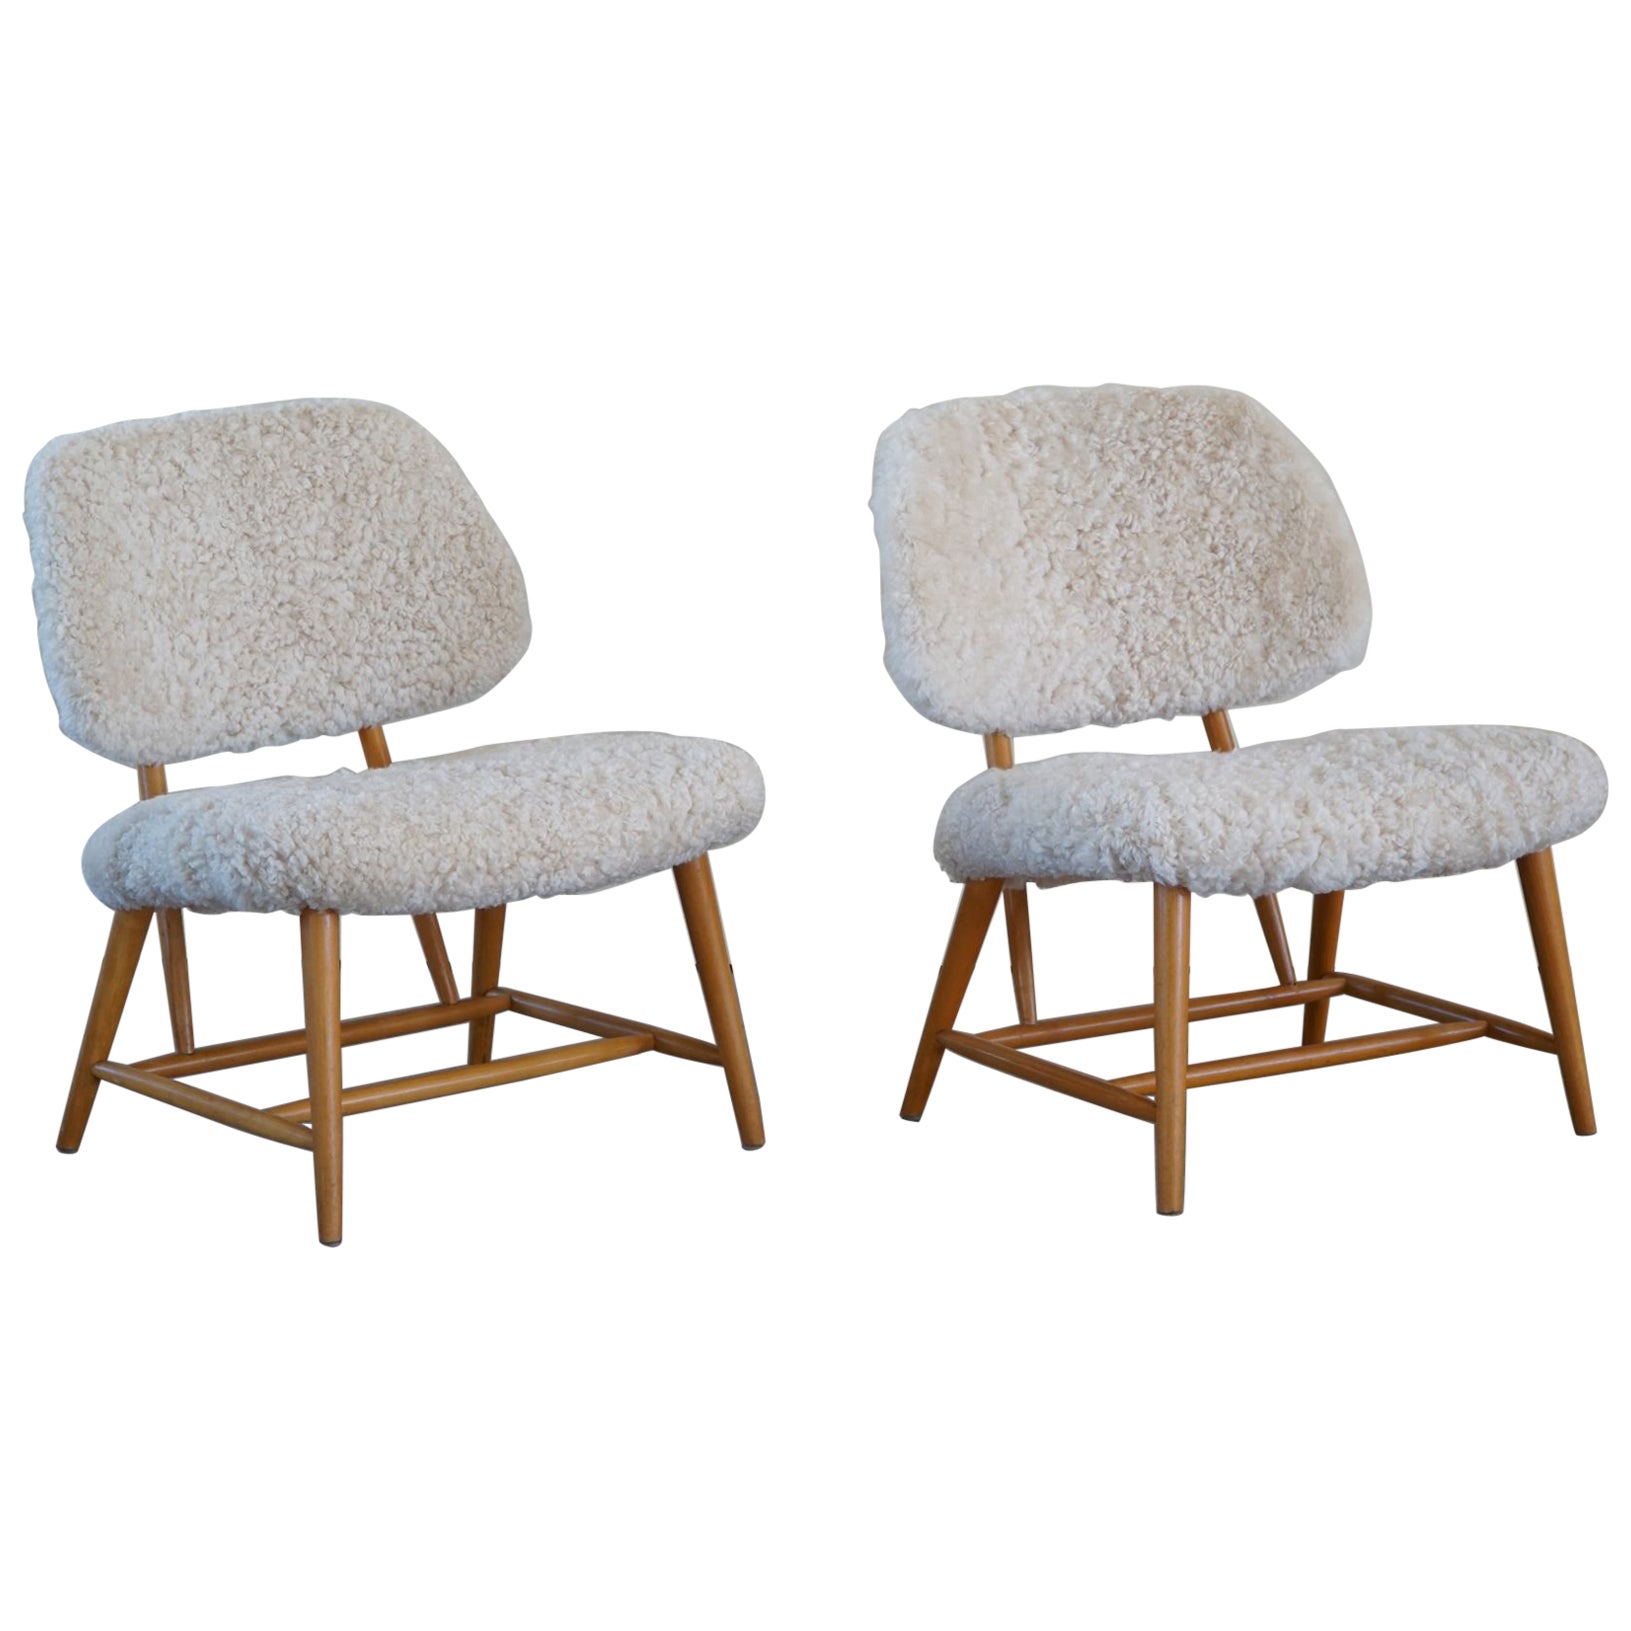 Alf Svensson, Pair of "TeVe" Lounge Chairs, Reupholstered in Lambswool, 1950s